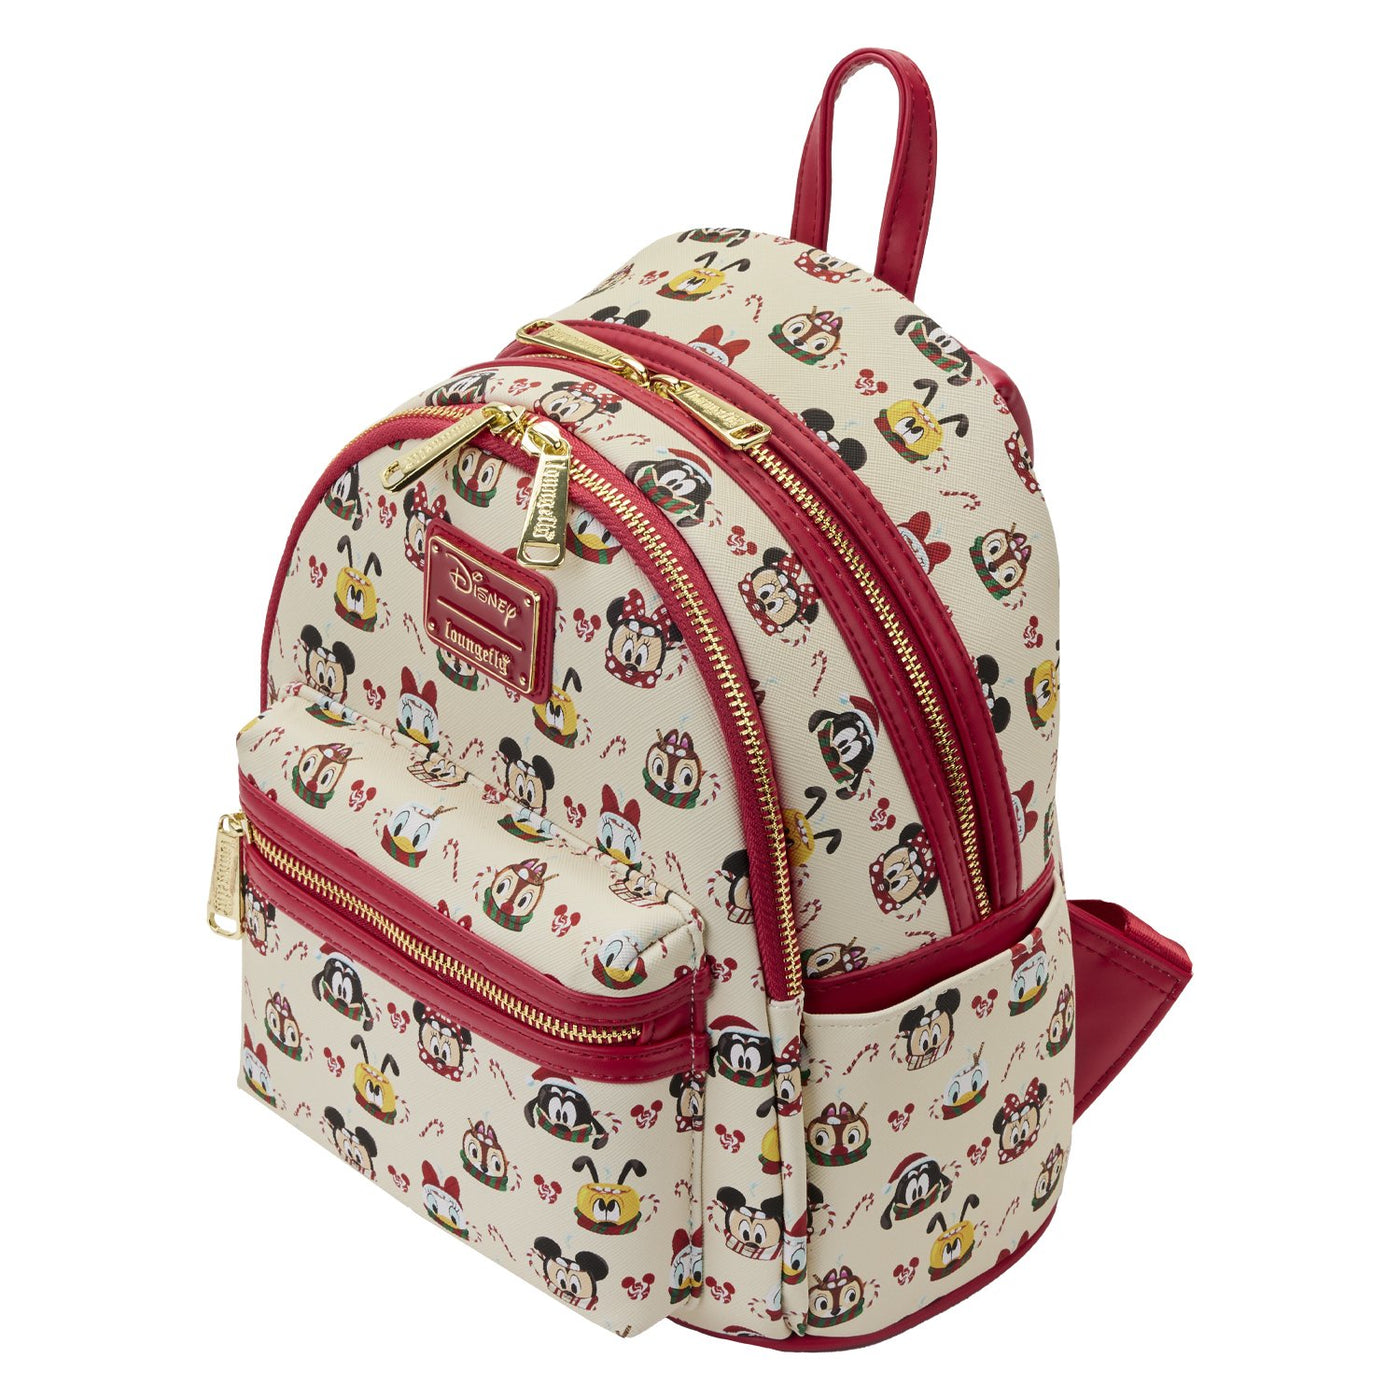 Loungefly Disney Hot Cocoa Allover Print Mini Backpack with Headband Combo - Top View